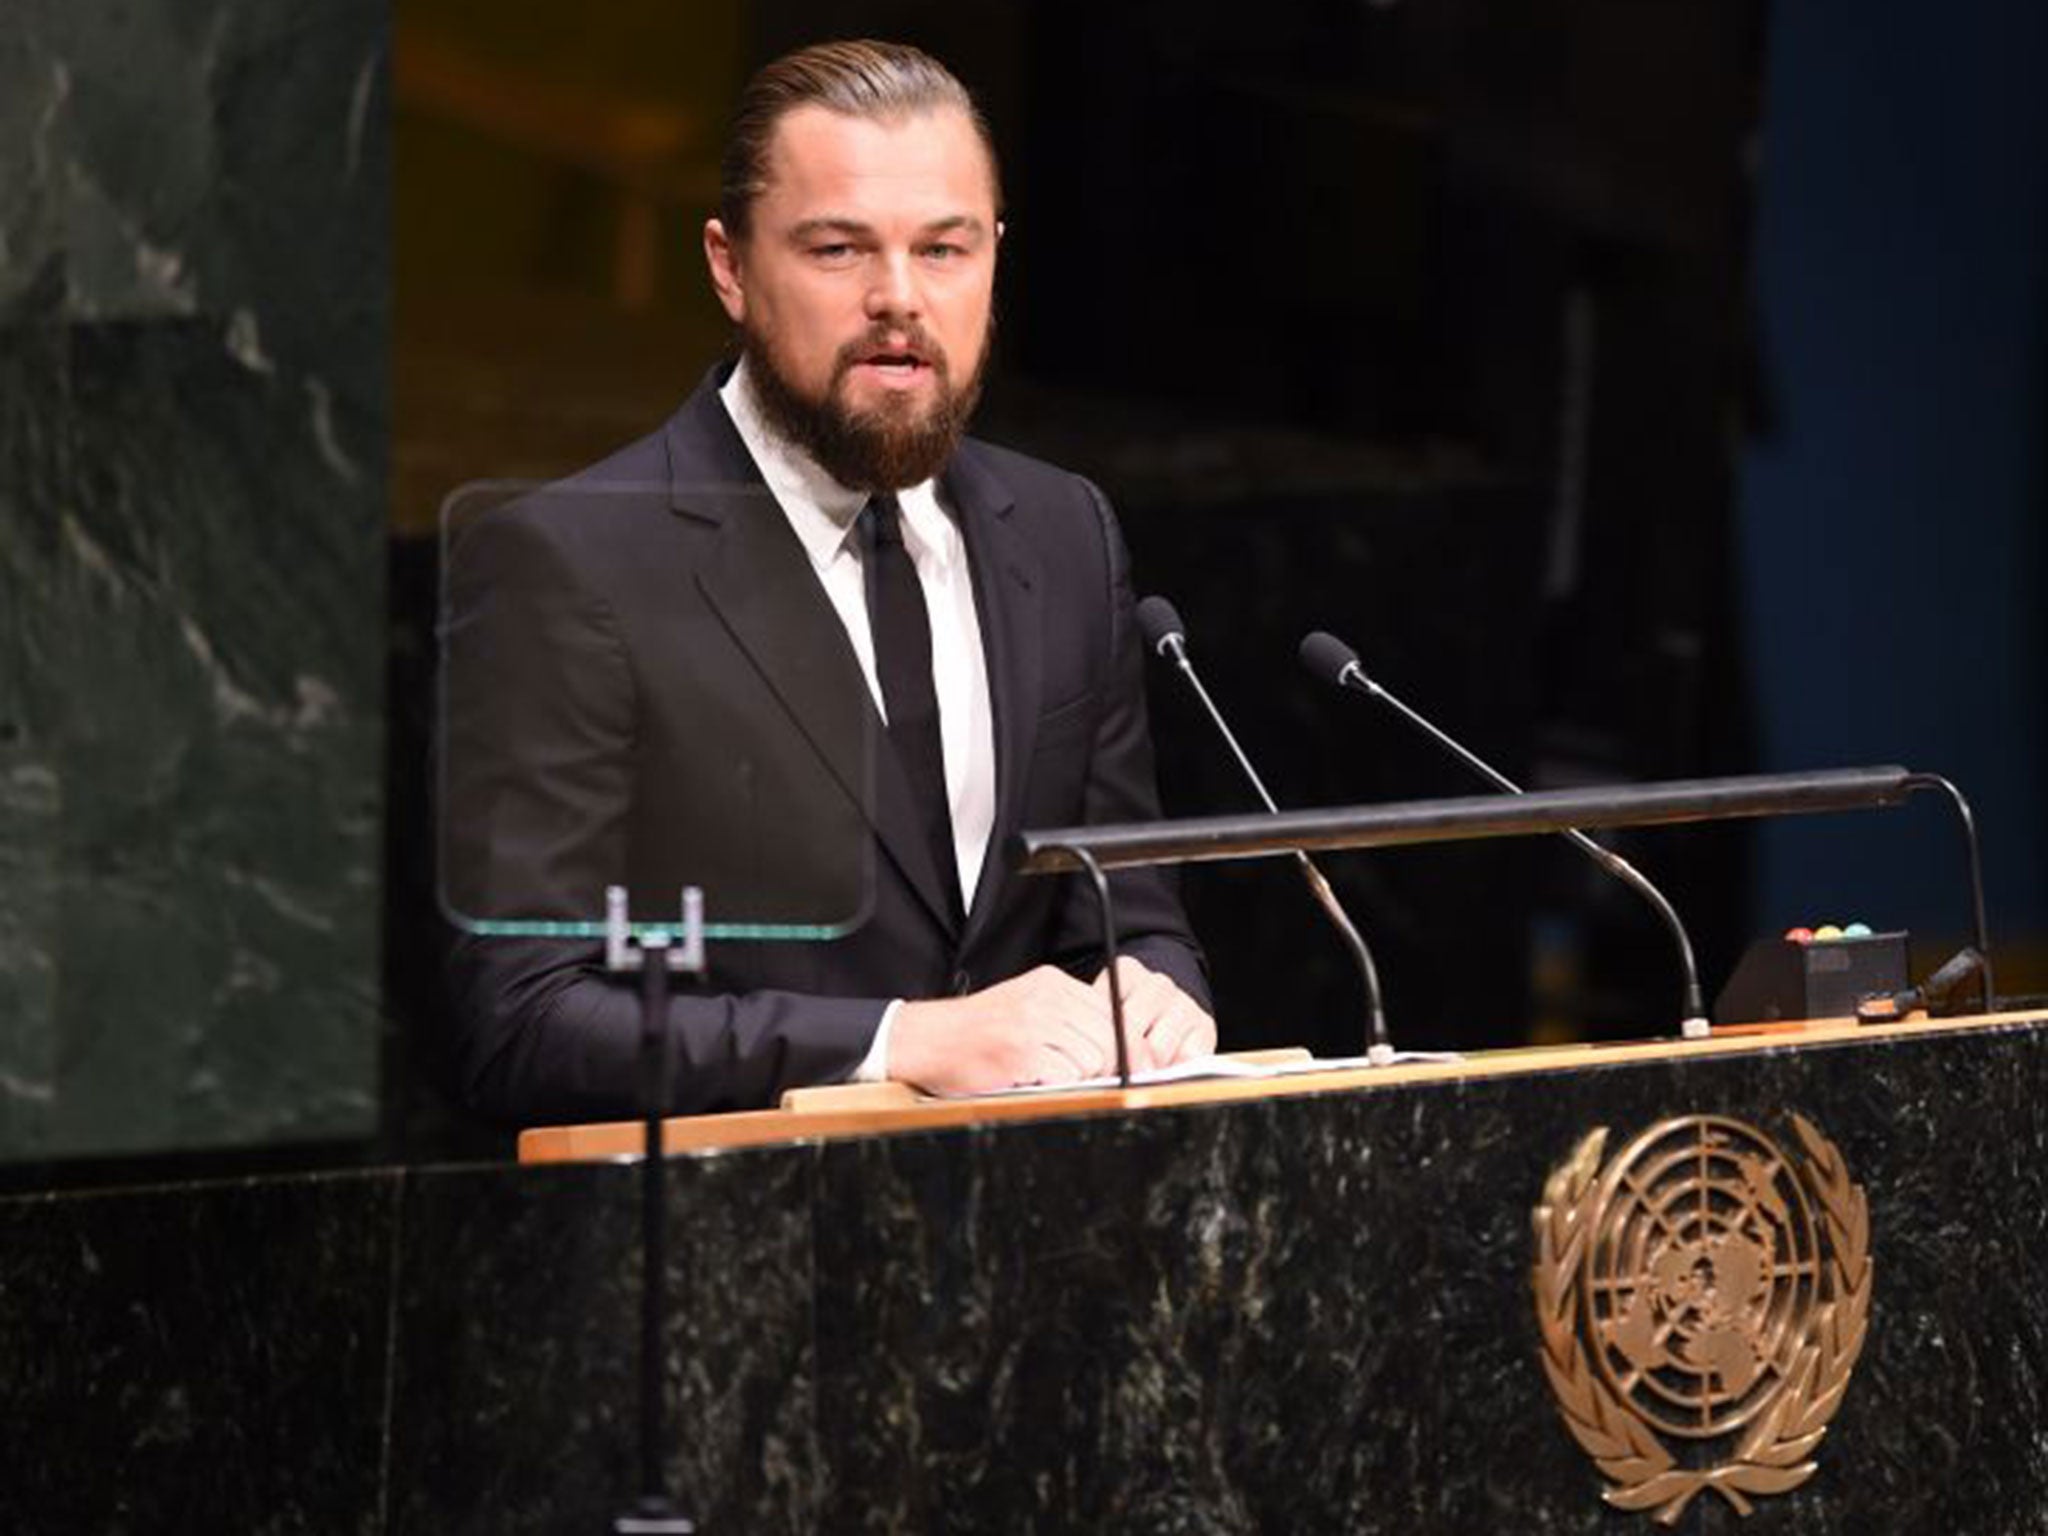 Leonardo DiCaprio was in New York to get his message across